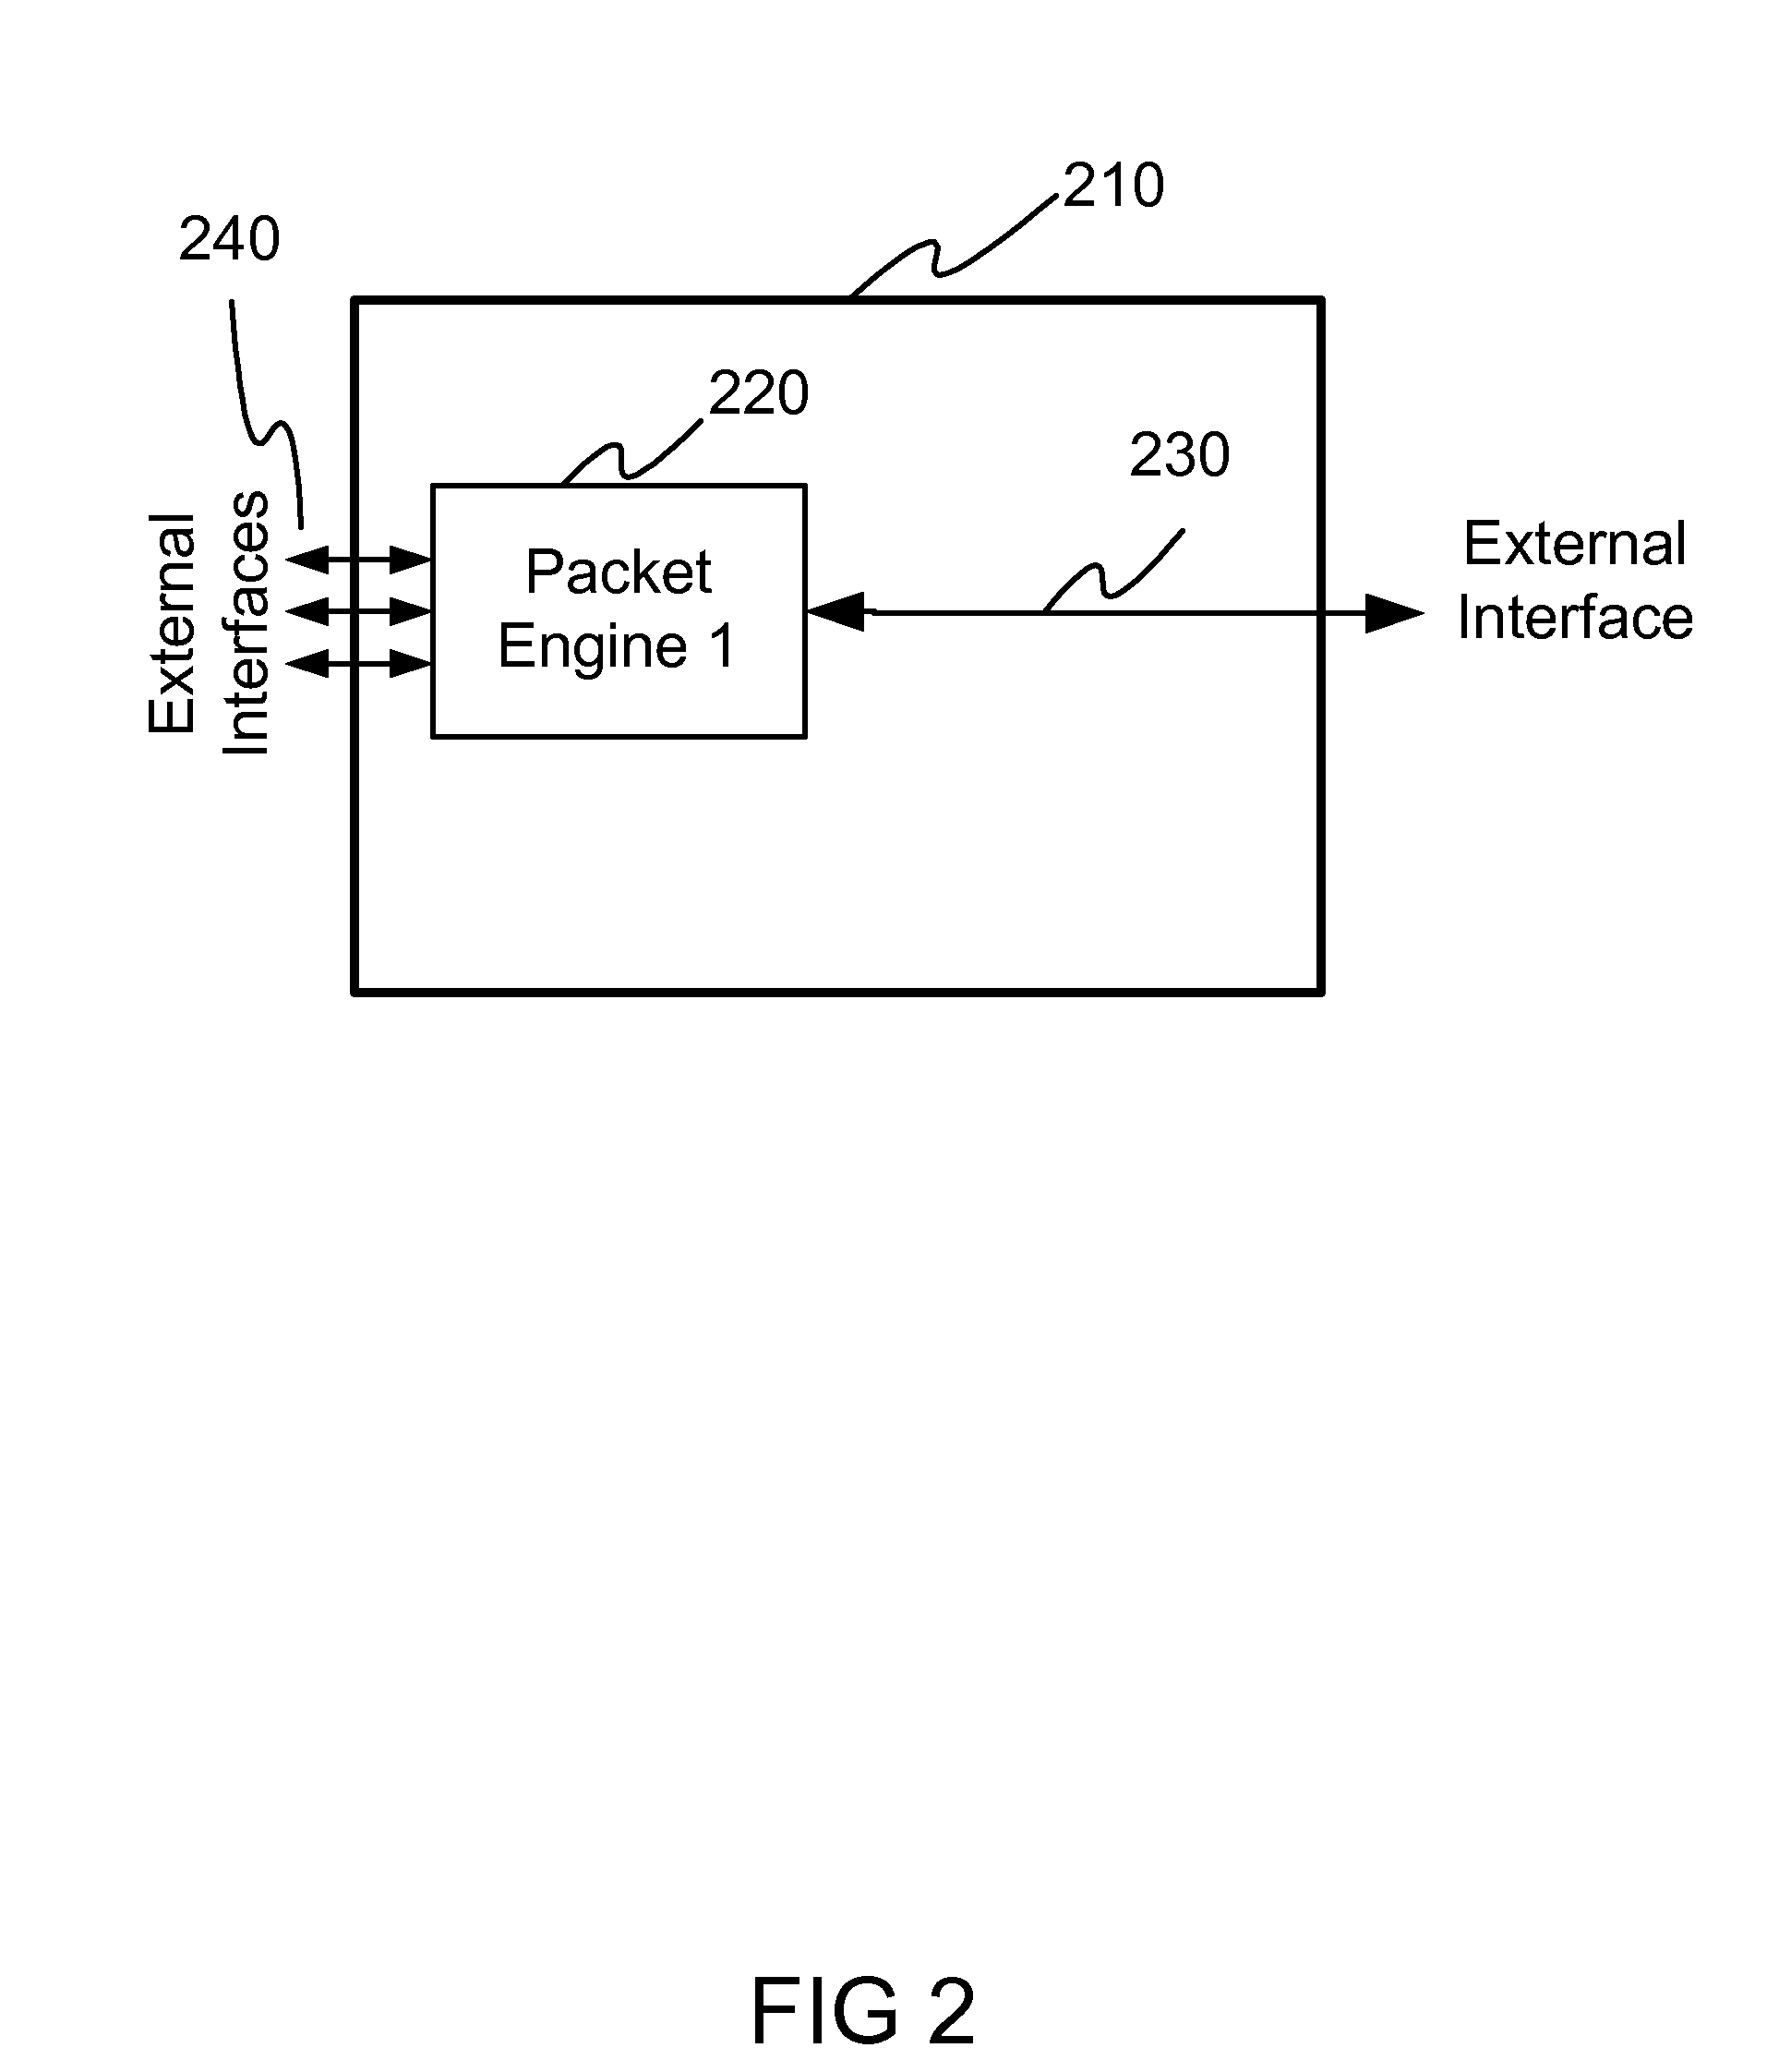 System and Method for Creating a Scalable Monolithic Packet Processing Engine